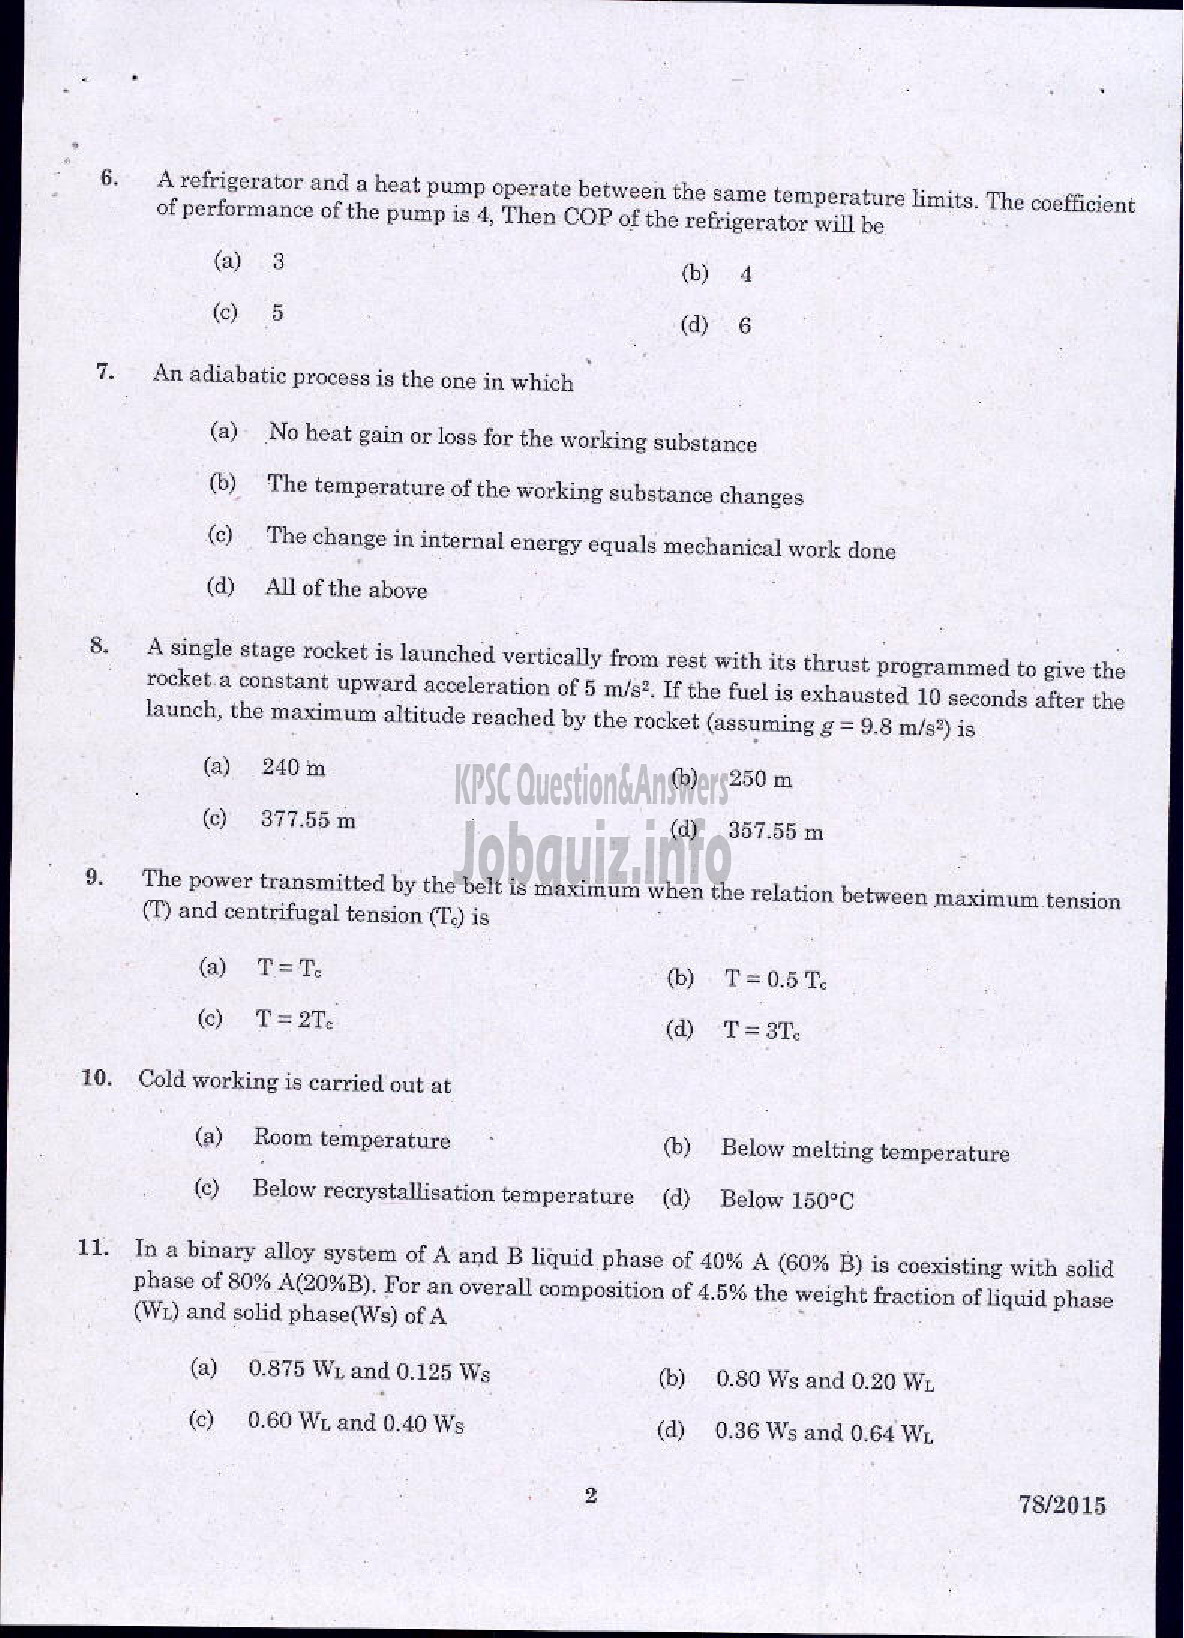 Kerala PSC Question Paper - MECHANICAL ENGINEERING-5